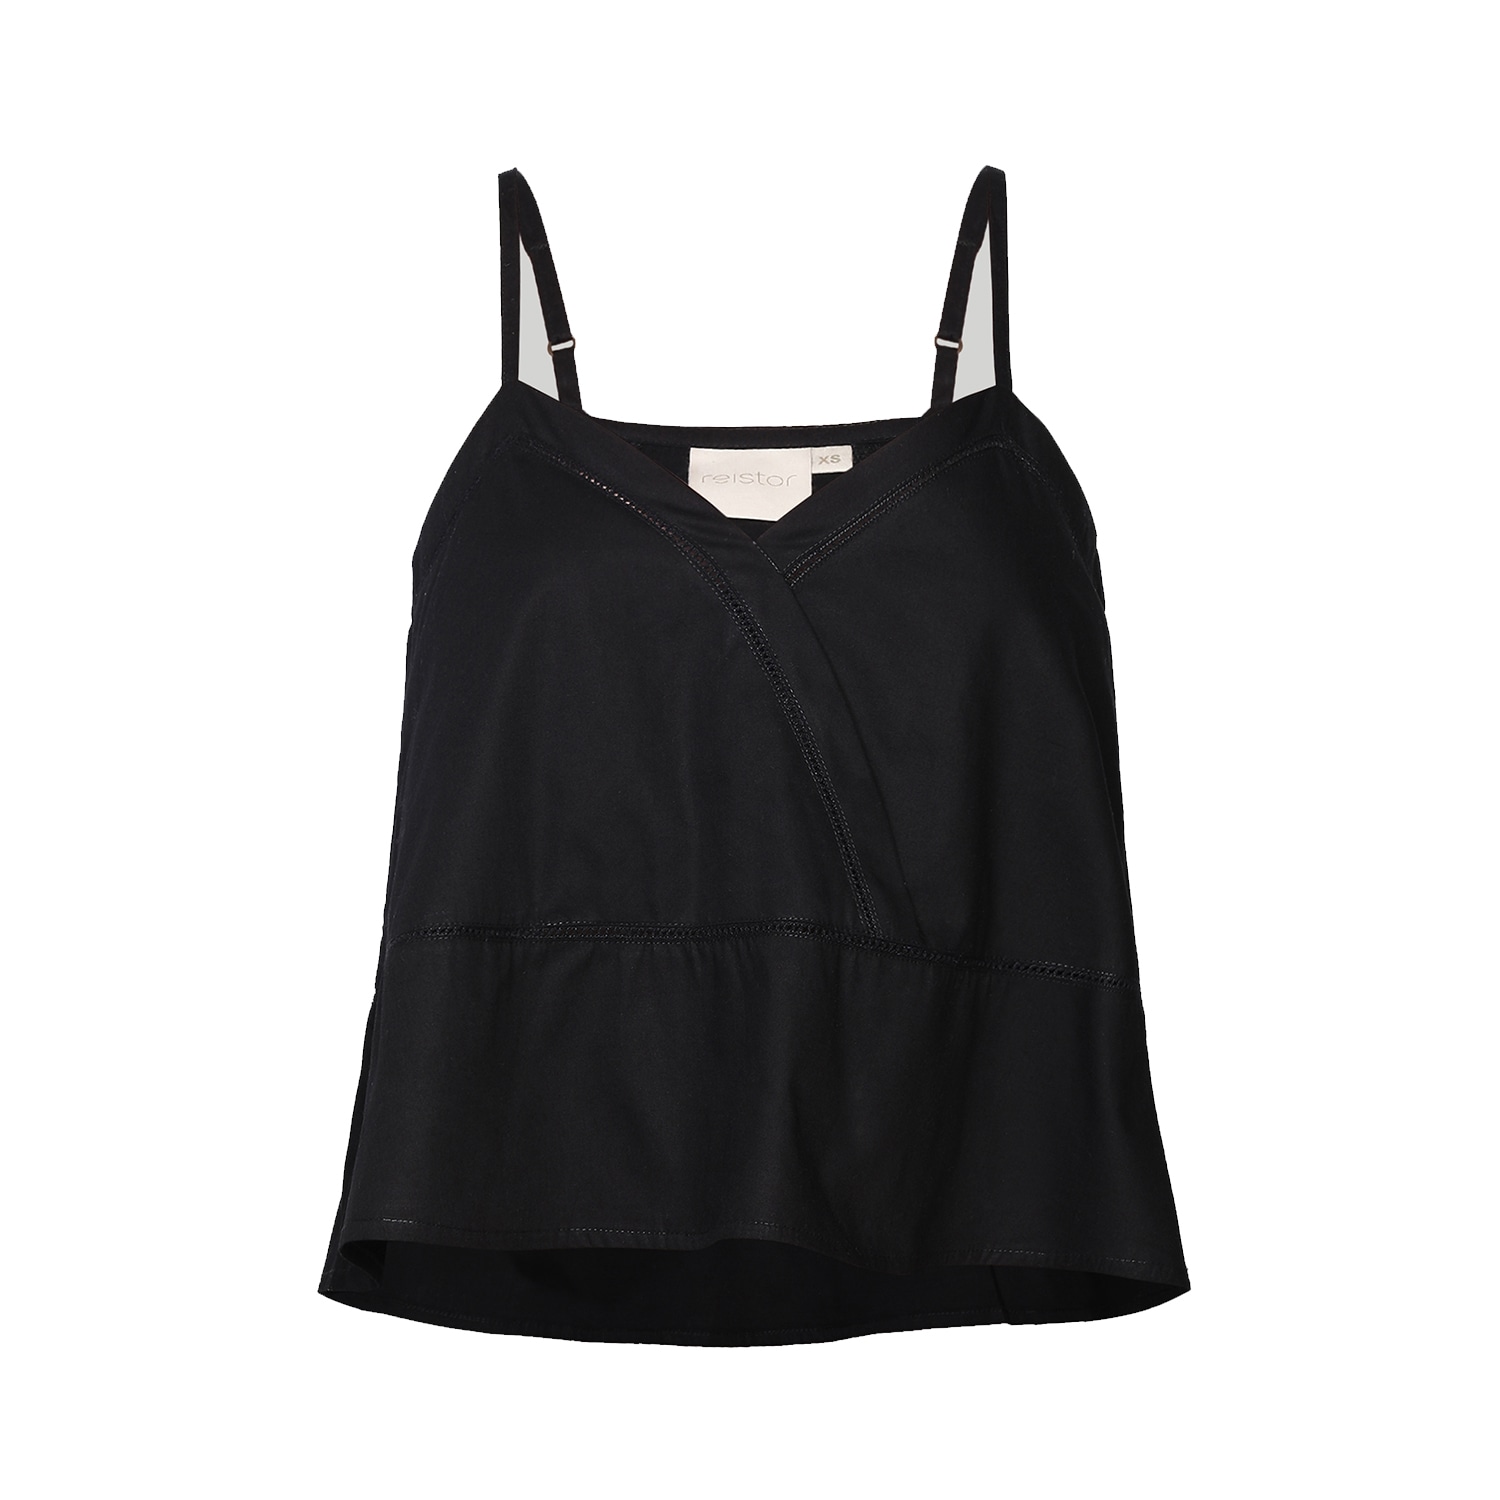 Women’s Black V-Neck Camisole With Lace Extra Small Reistor